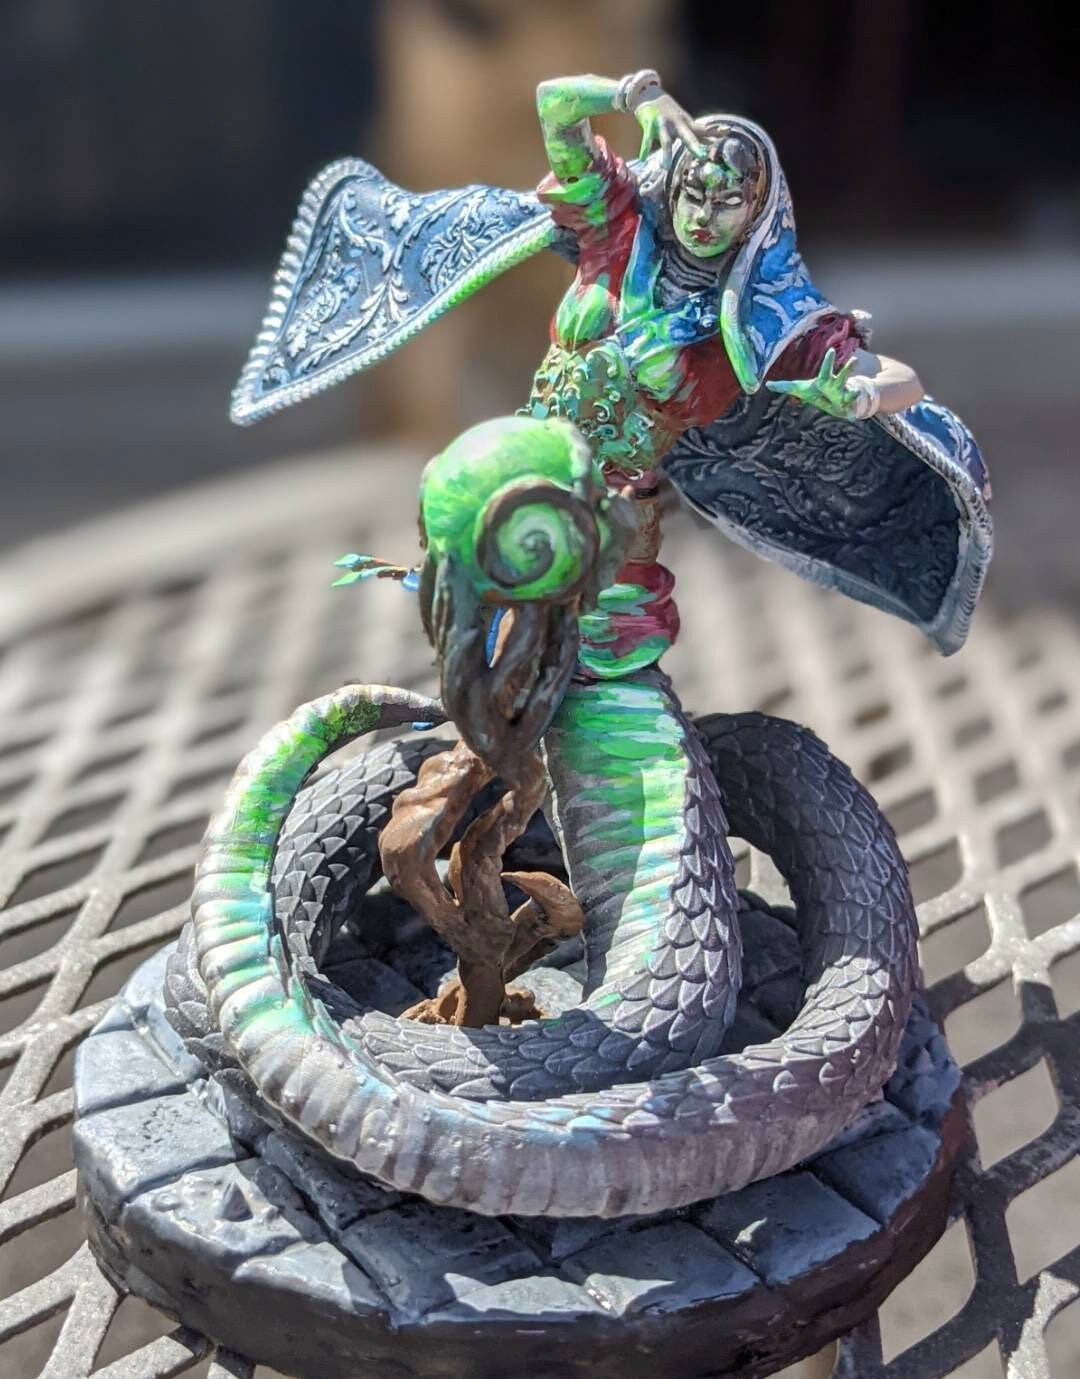 Raza the Fortune Teller painted model - Archvillain Games Printed Miniatures | Dungeons & Dragons | Pathfinder | Tabletop